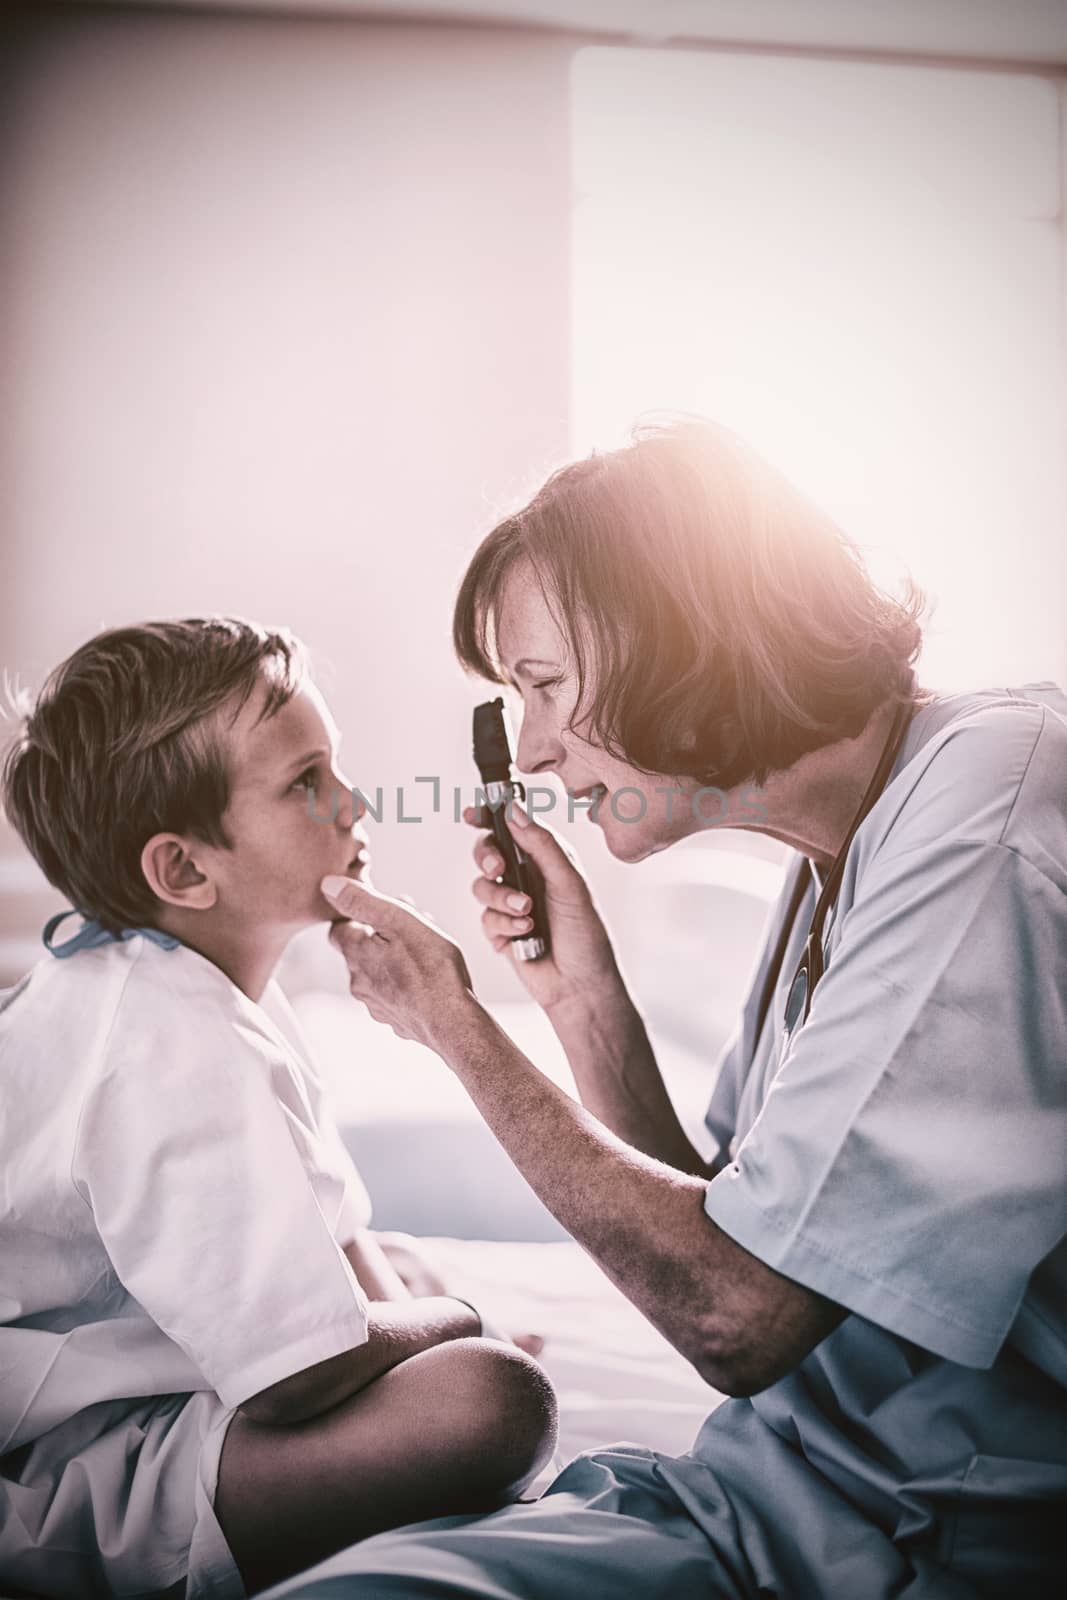 Female doctor examining patient with ophthalmic device by Wavebreakmedia